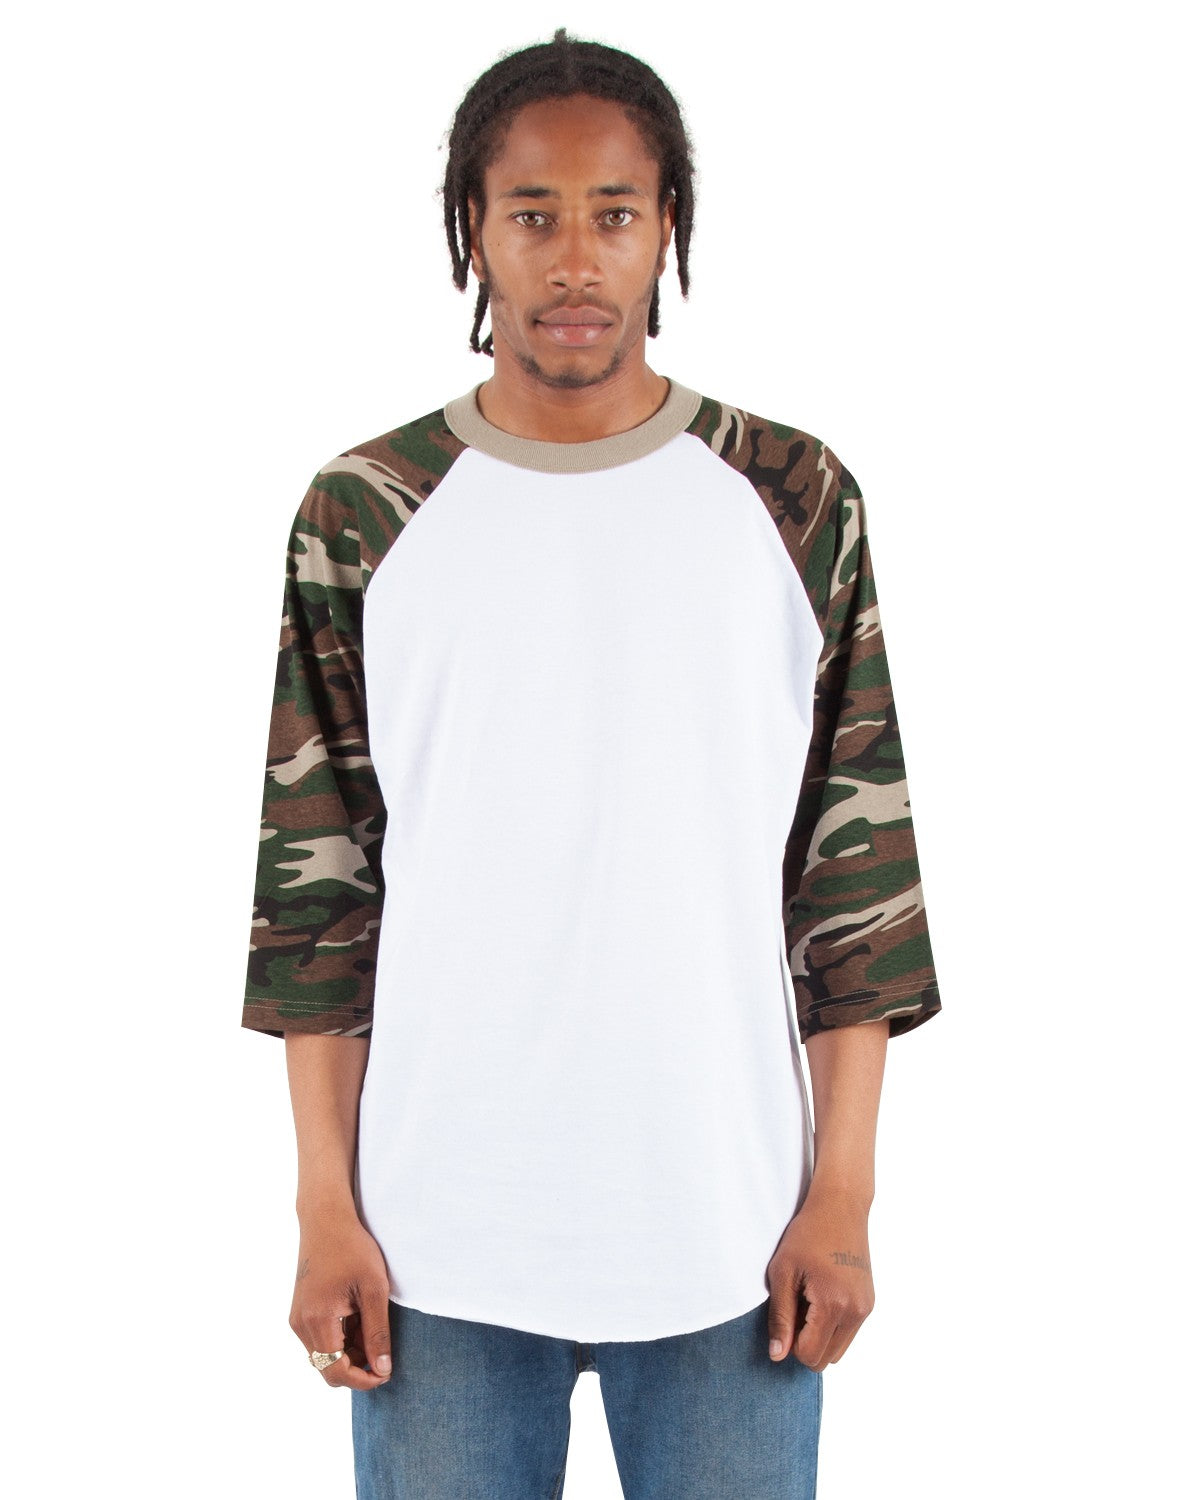 Adult raglan White T-shirt with Camo Sleeves – Lucky Wholesale